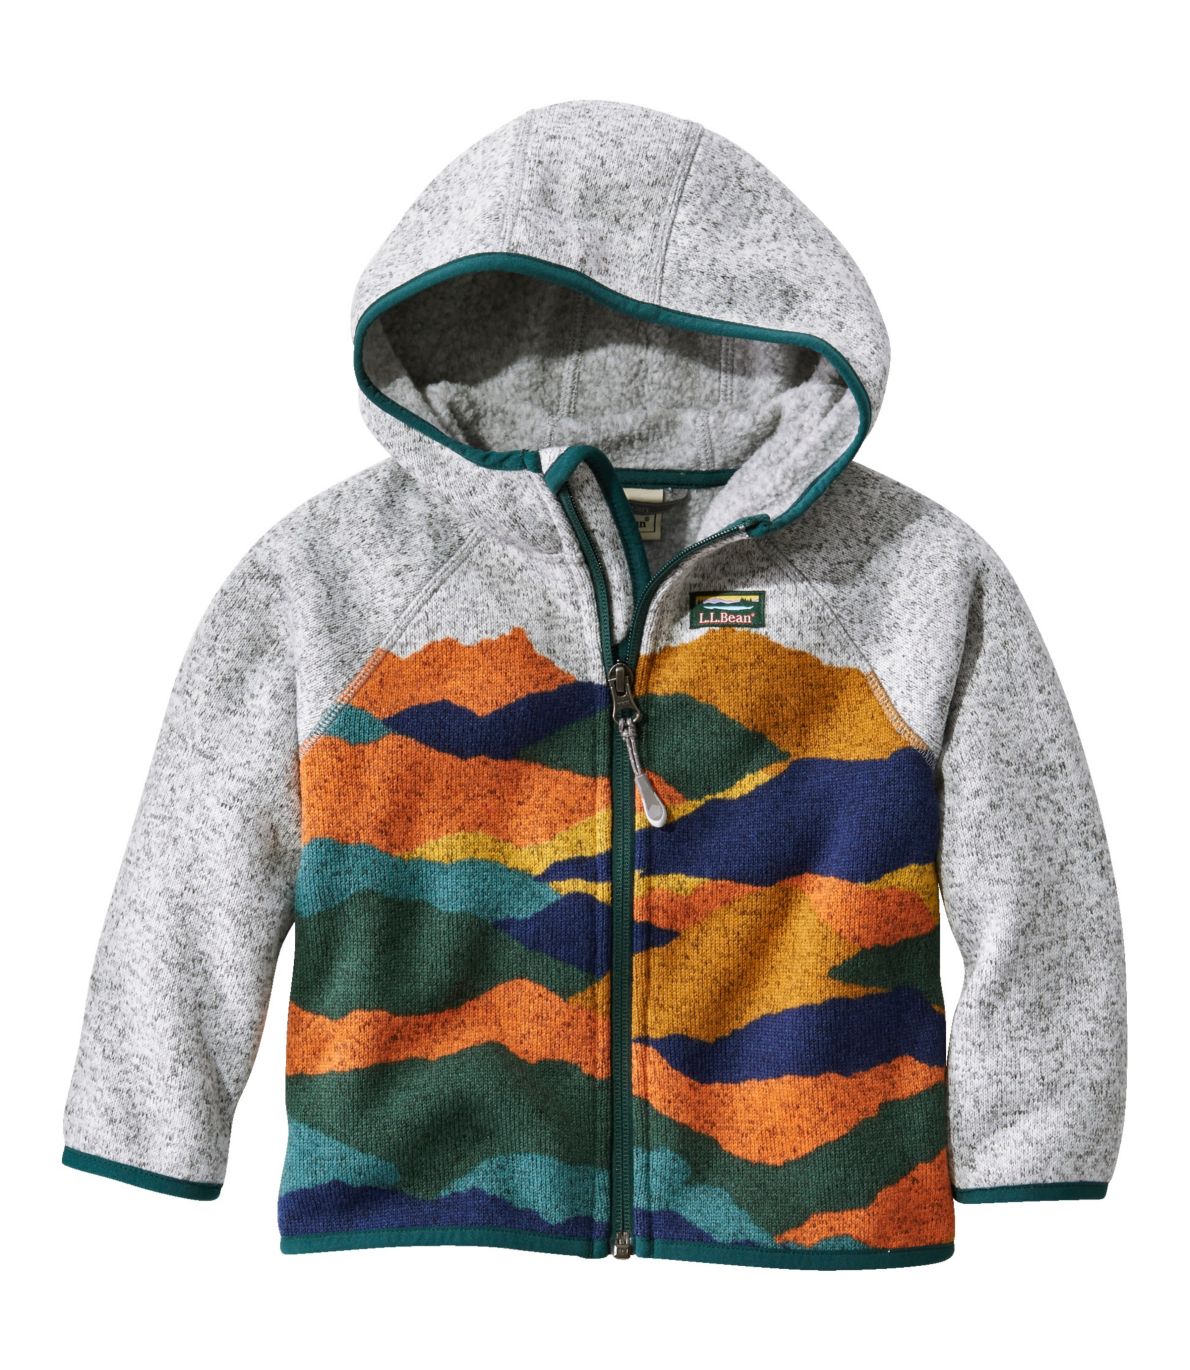 Infants' and Toddlers' L.L.Bean Sweater Fleece, Full-Zip Print